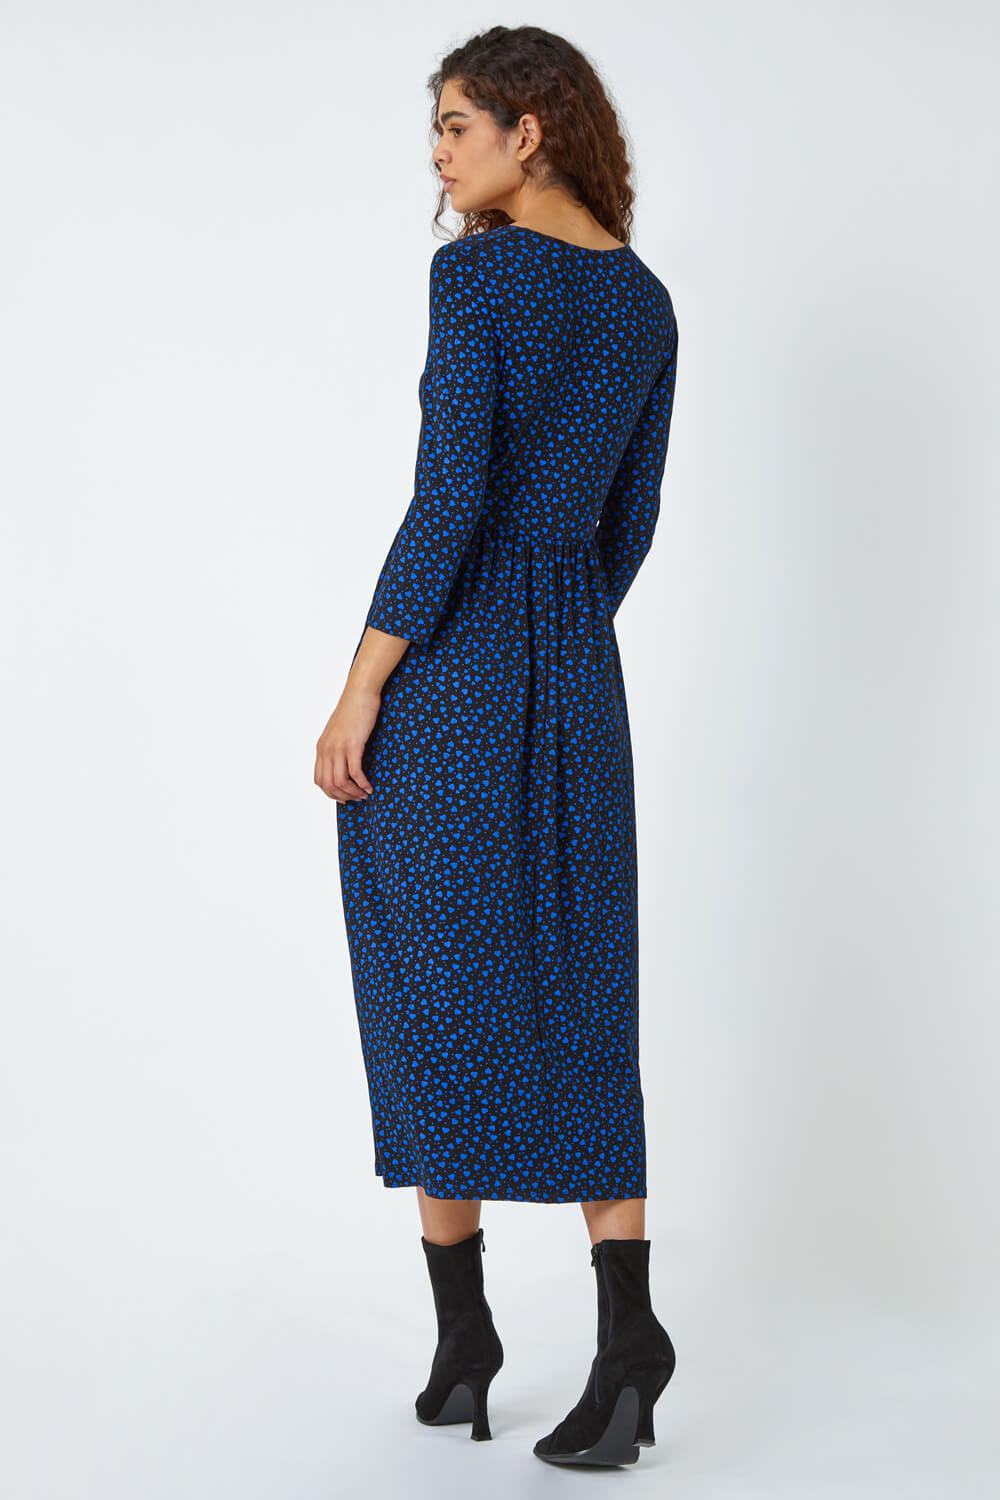 Royal Blue Heart Print Ruched Detail Stretch Midi Dress, Image 3 of 5